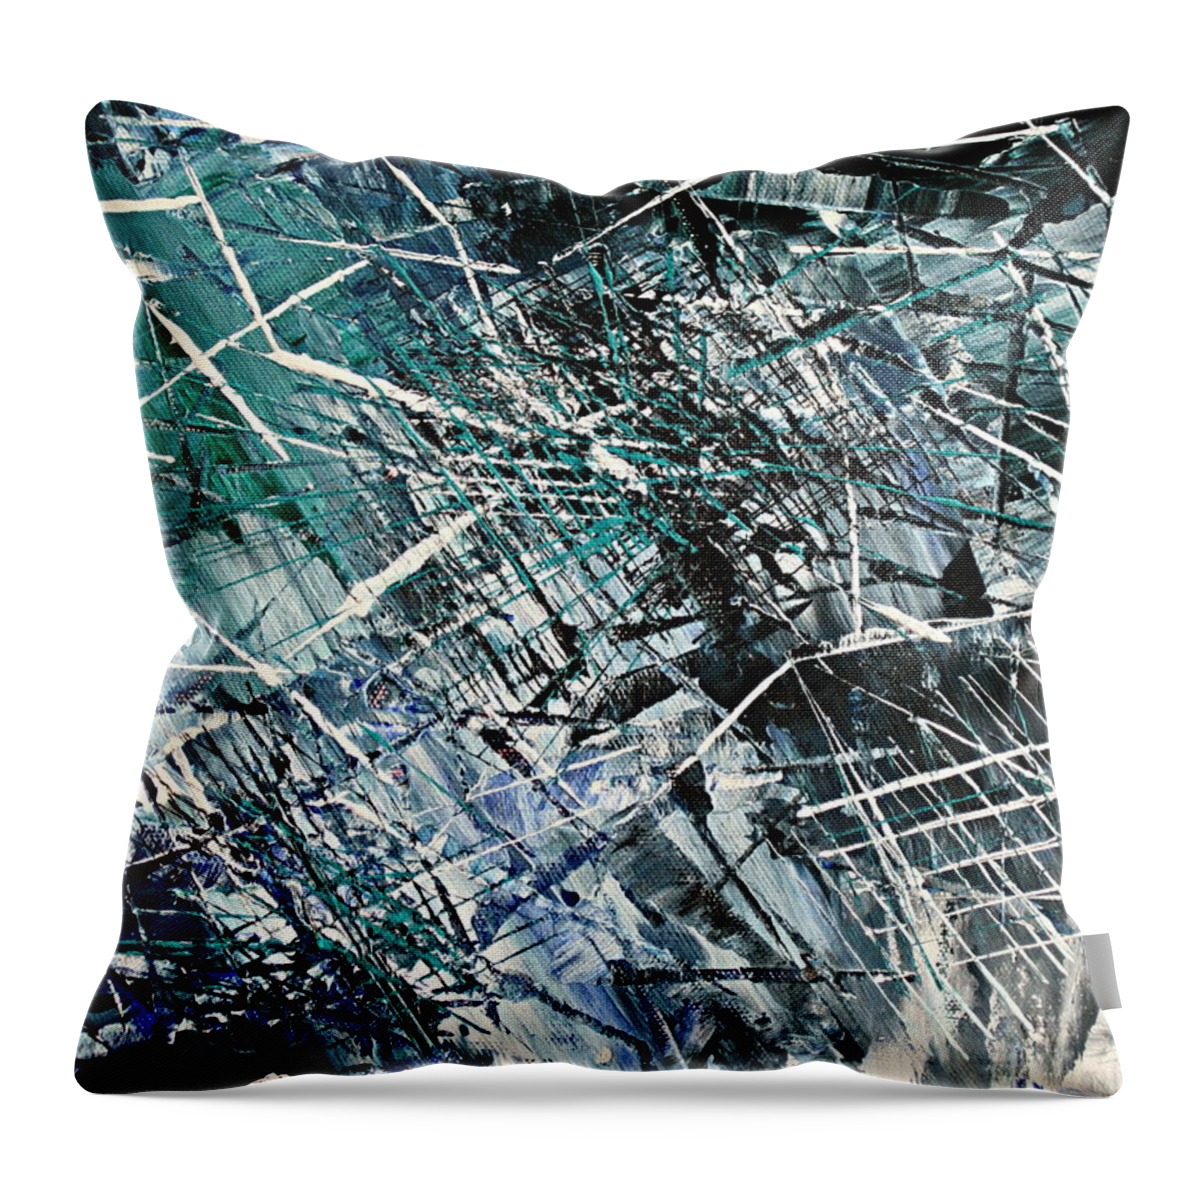 Abstract Art Throw Pillow featuring the painting Regency by Kathy Sheeran